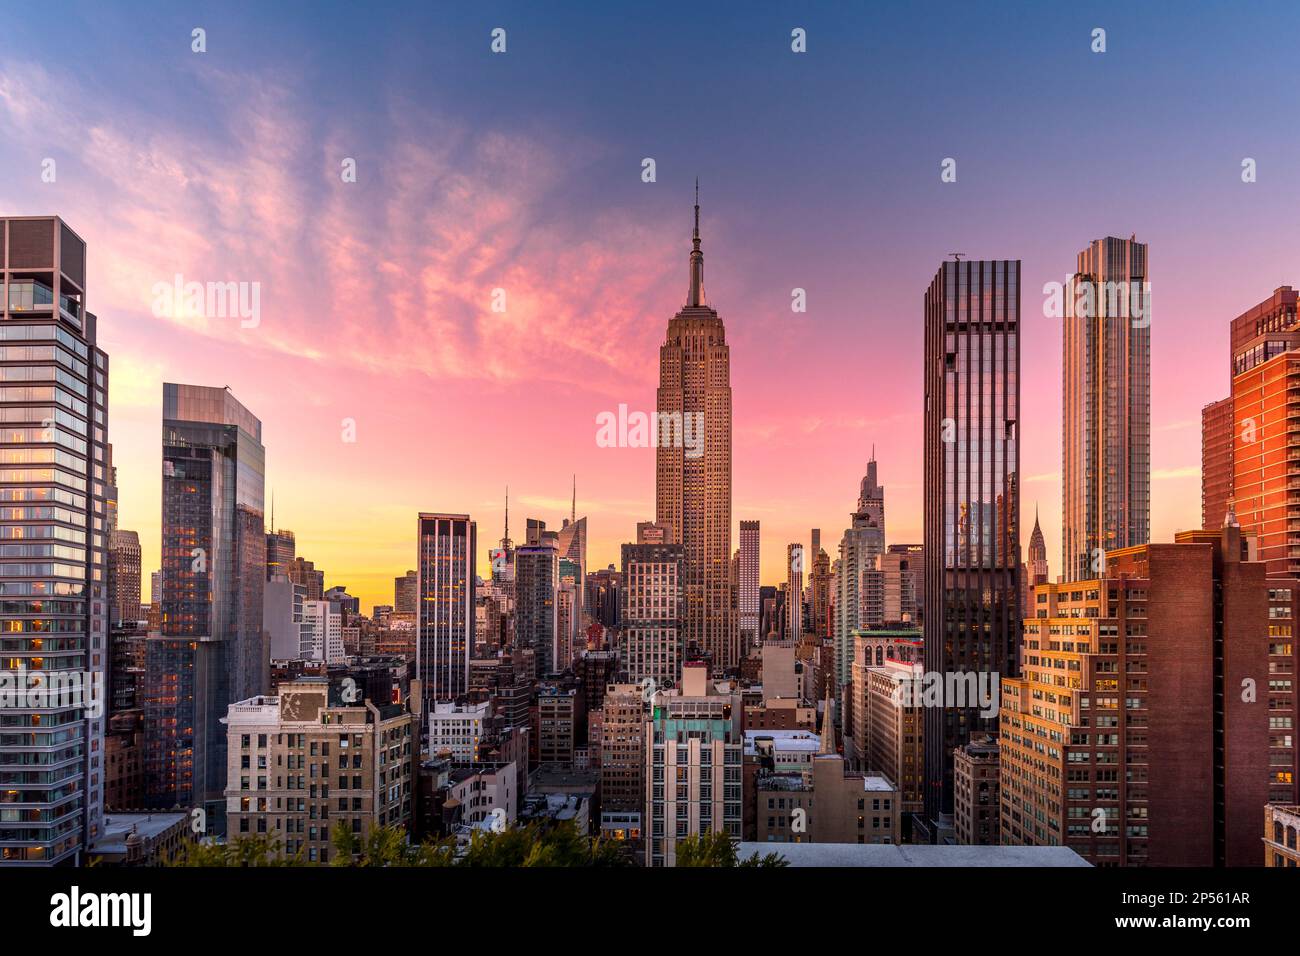 New York, USA - April 23, 2022: New York skyline at the end of sunset with Empire State Building in foreground Stock Photo